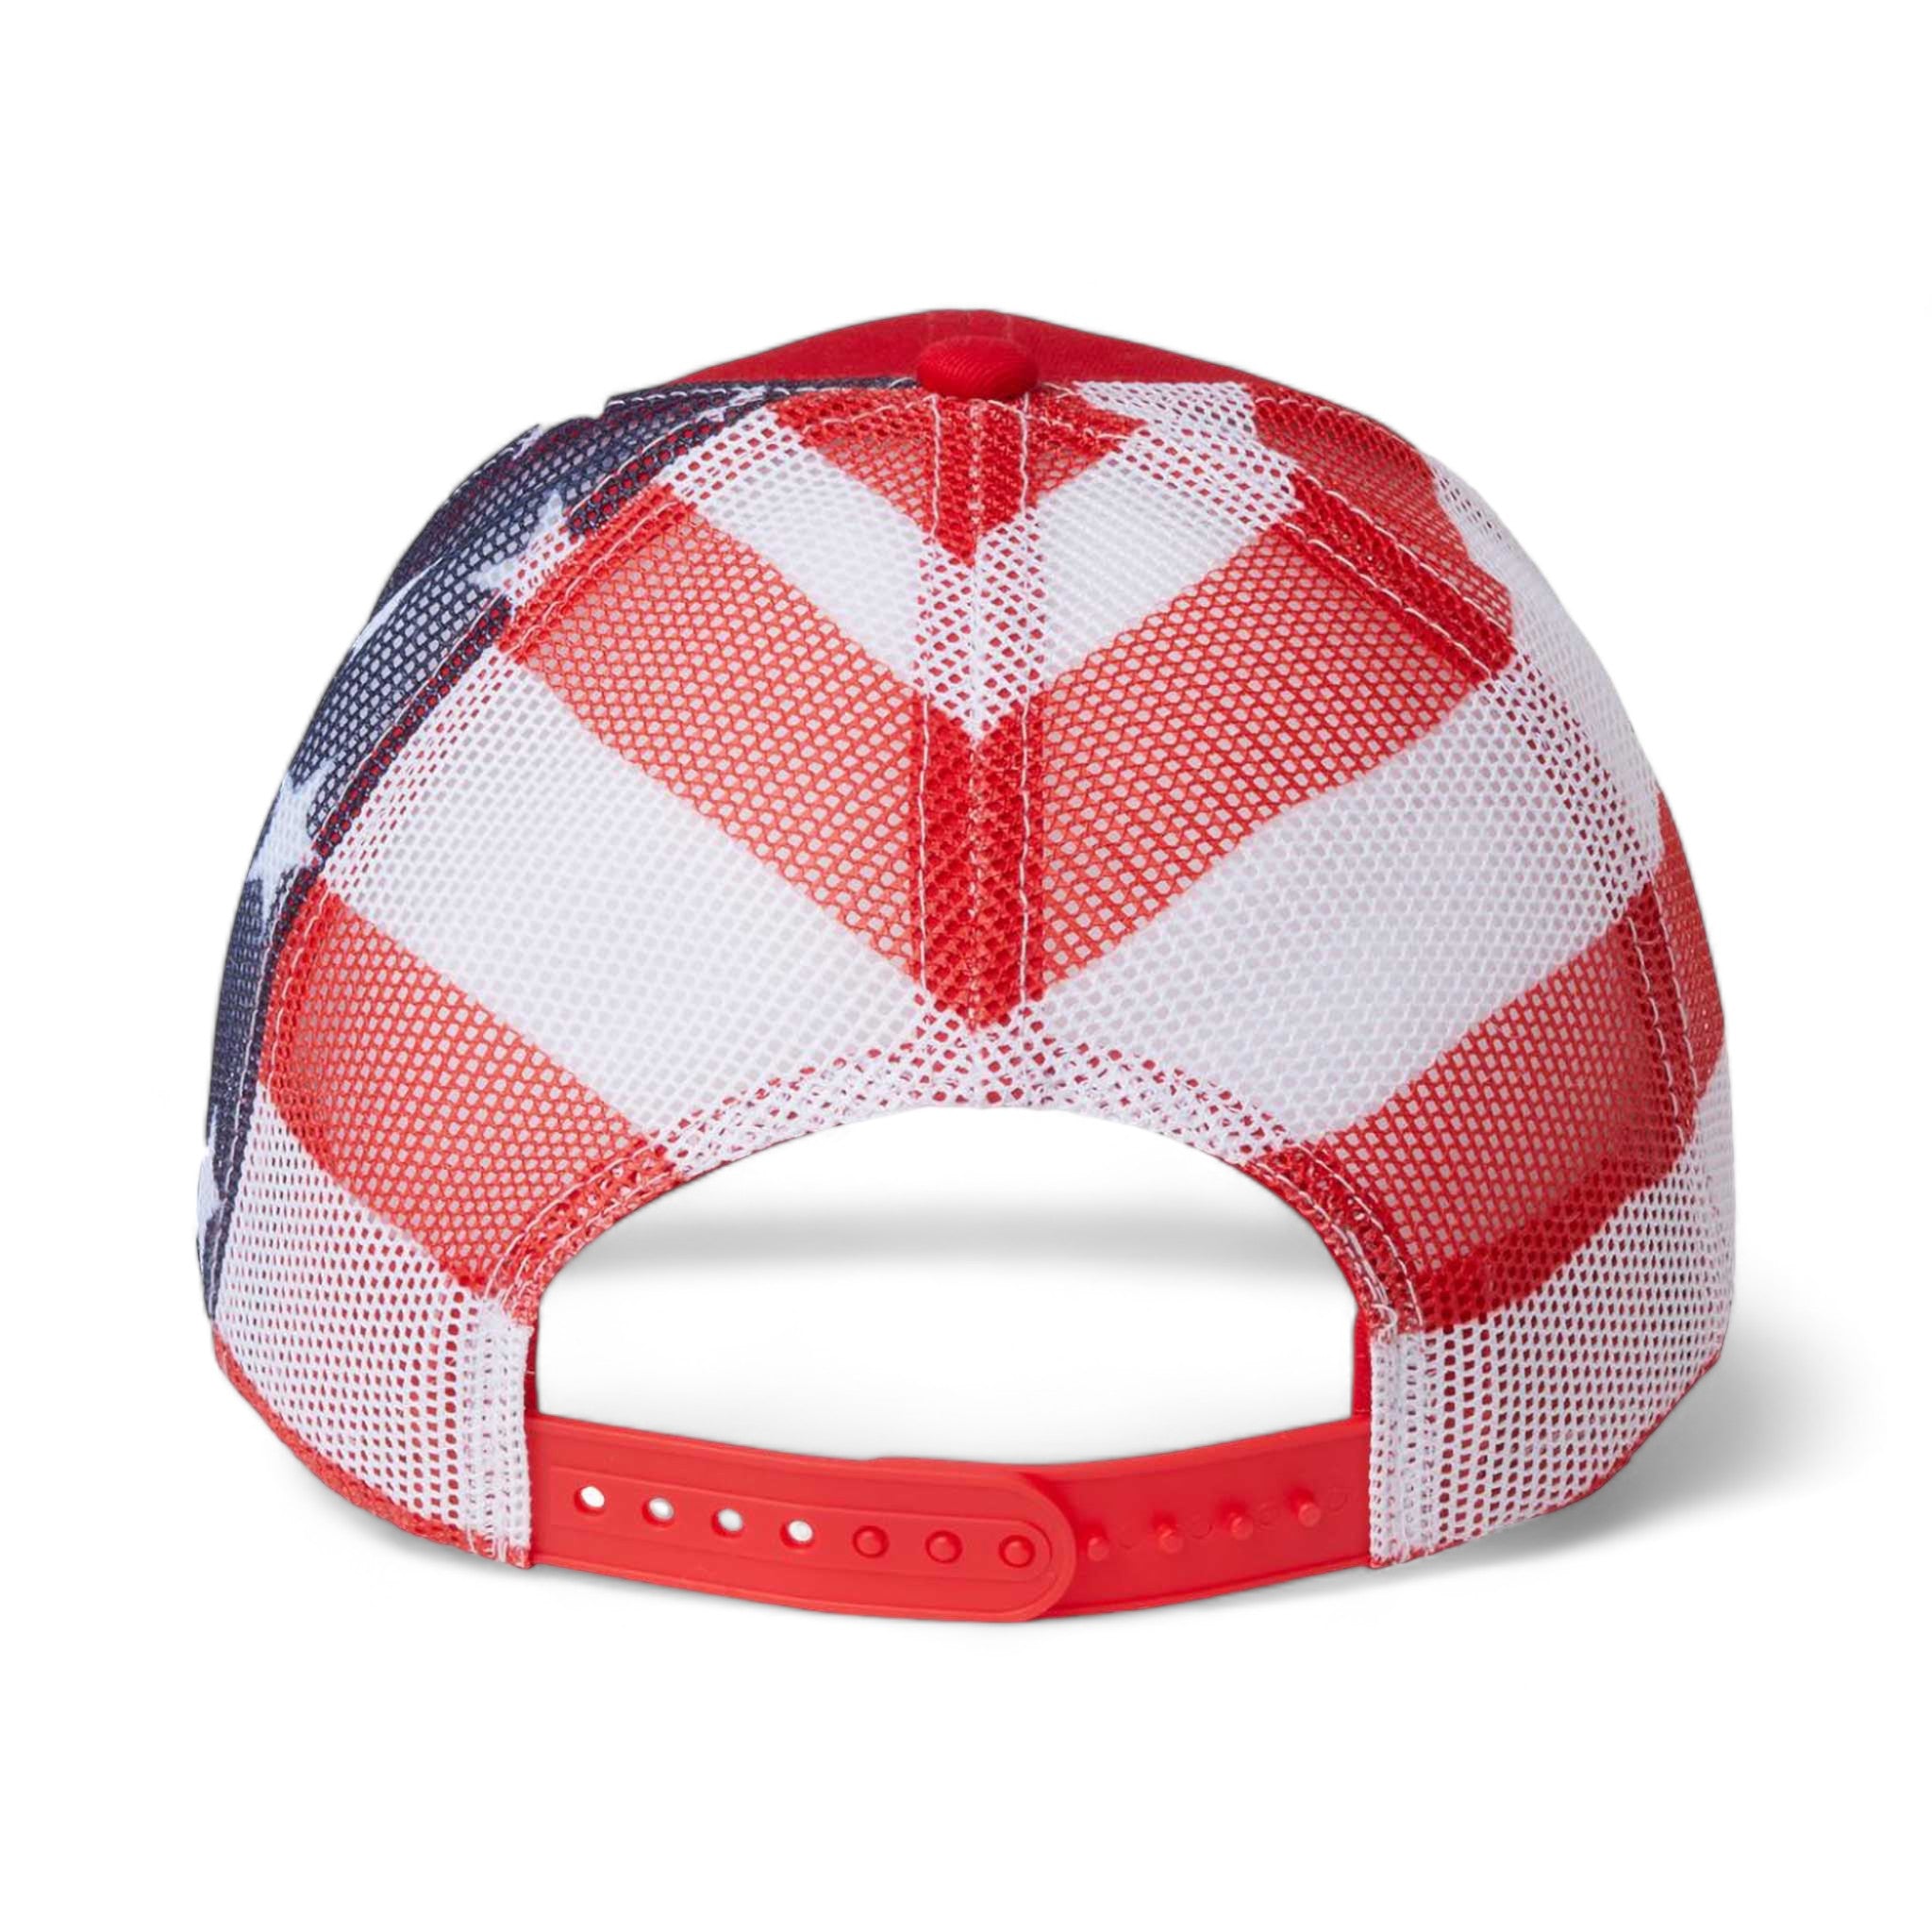 Back view of Kati S700M custom hat in red and usa flag